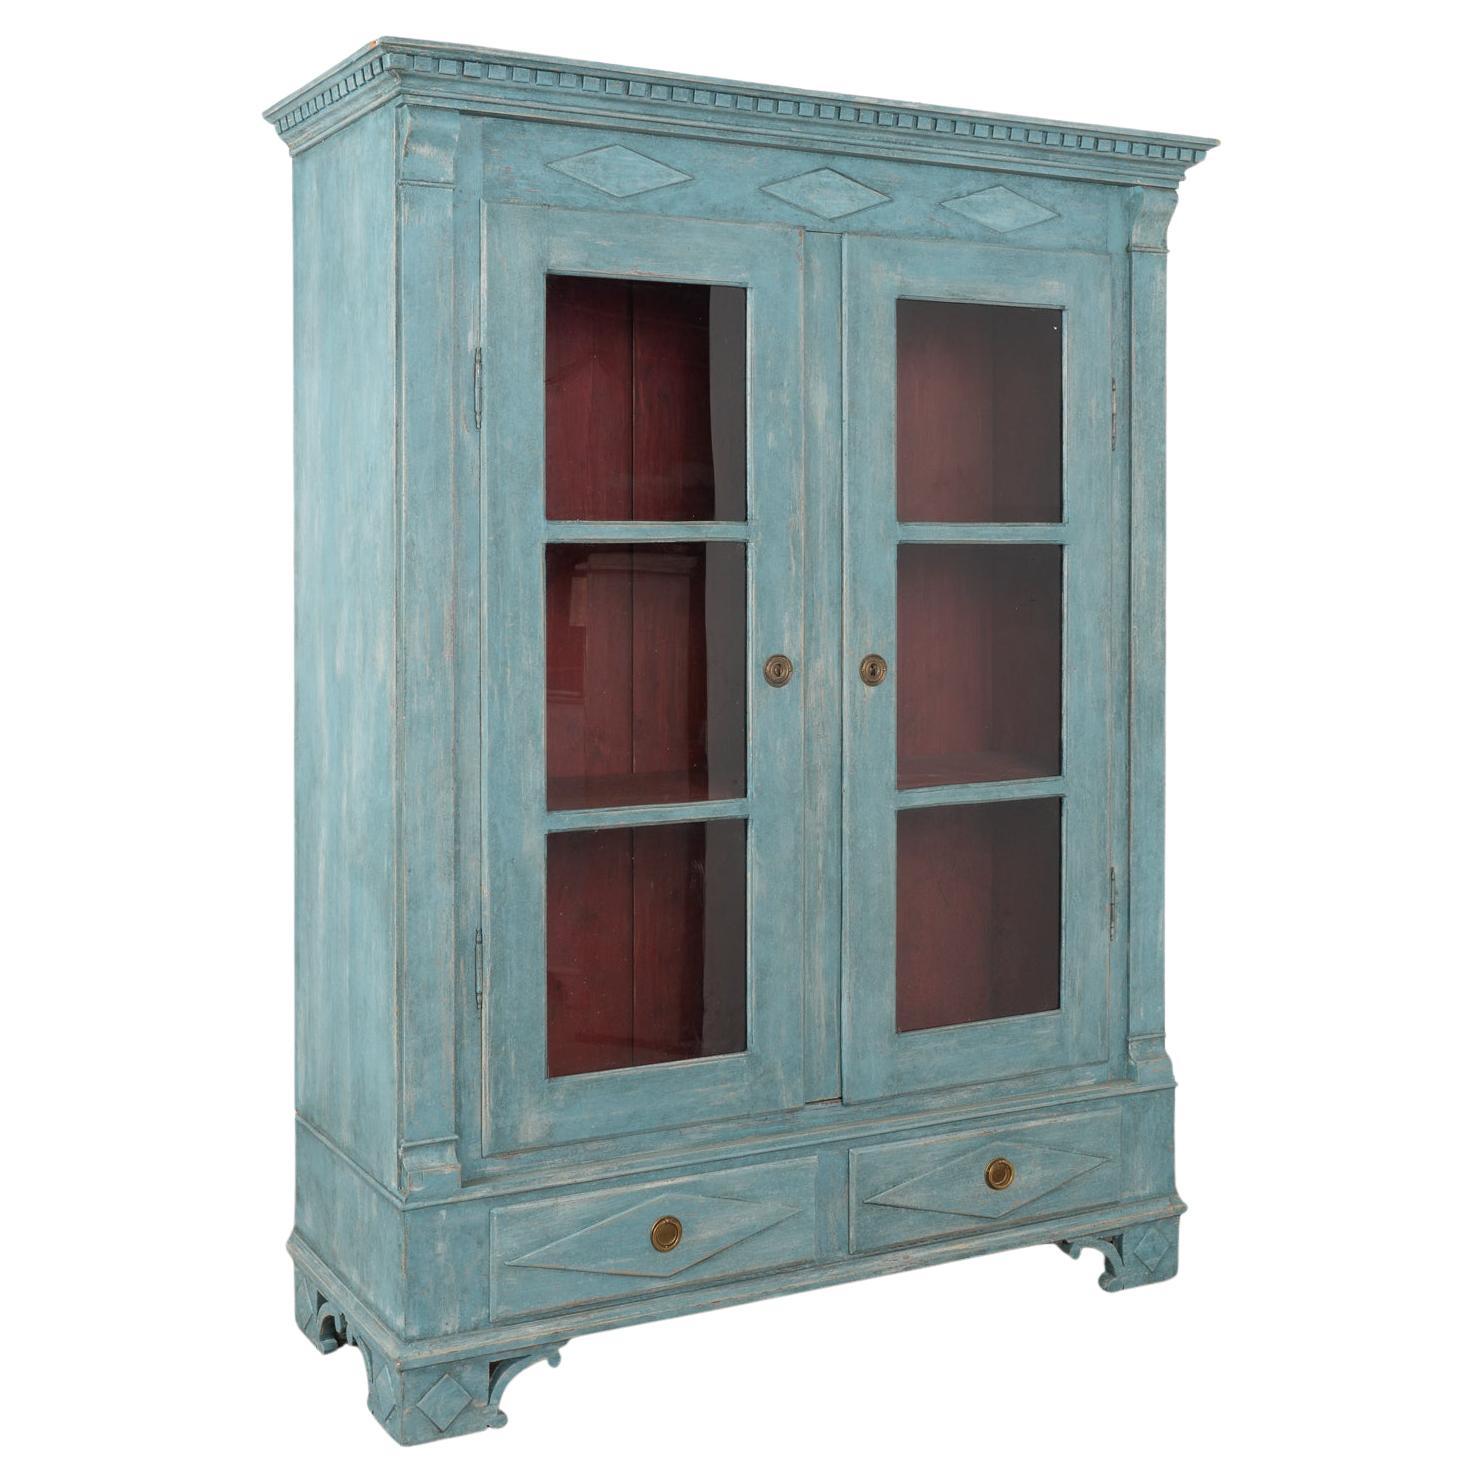 Blue Painted Bookcase Display Cabinet with Glass Doors, Denmark circa 1840 For Sale